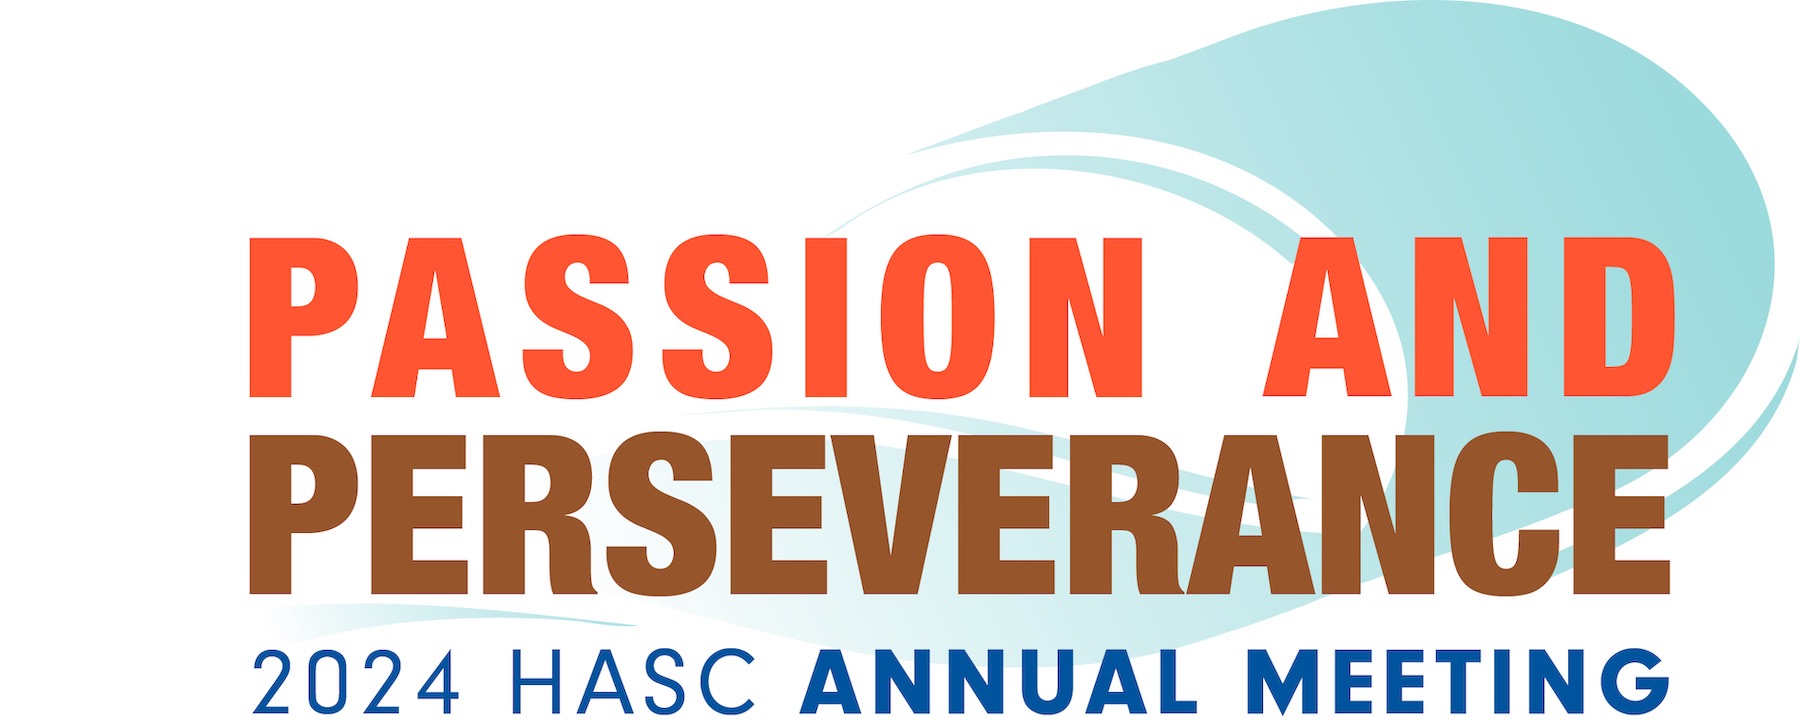 Passion and Perseverance - HASC 2024 Annual Meeting